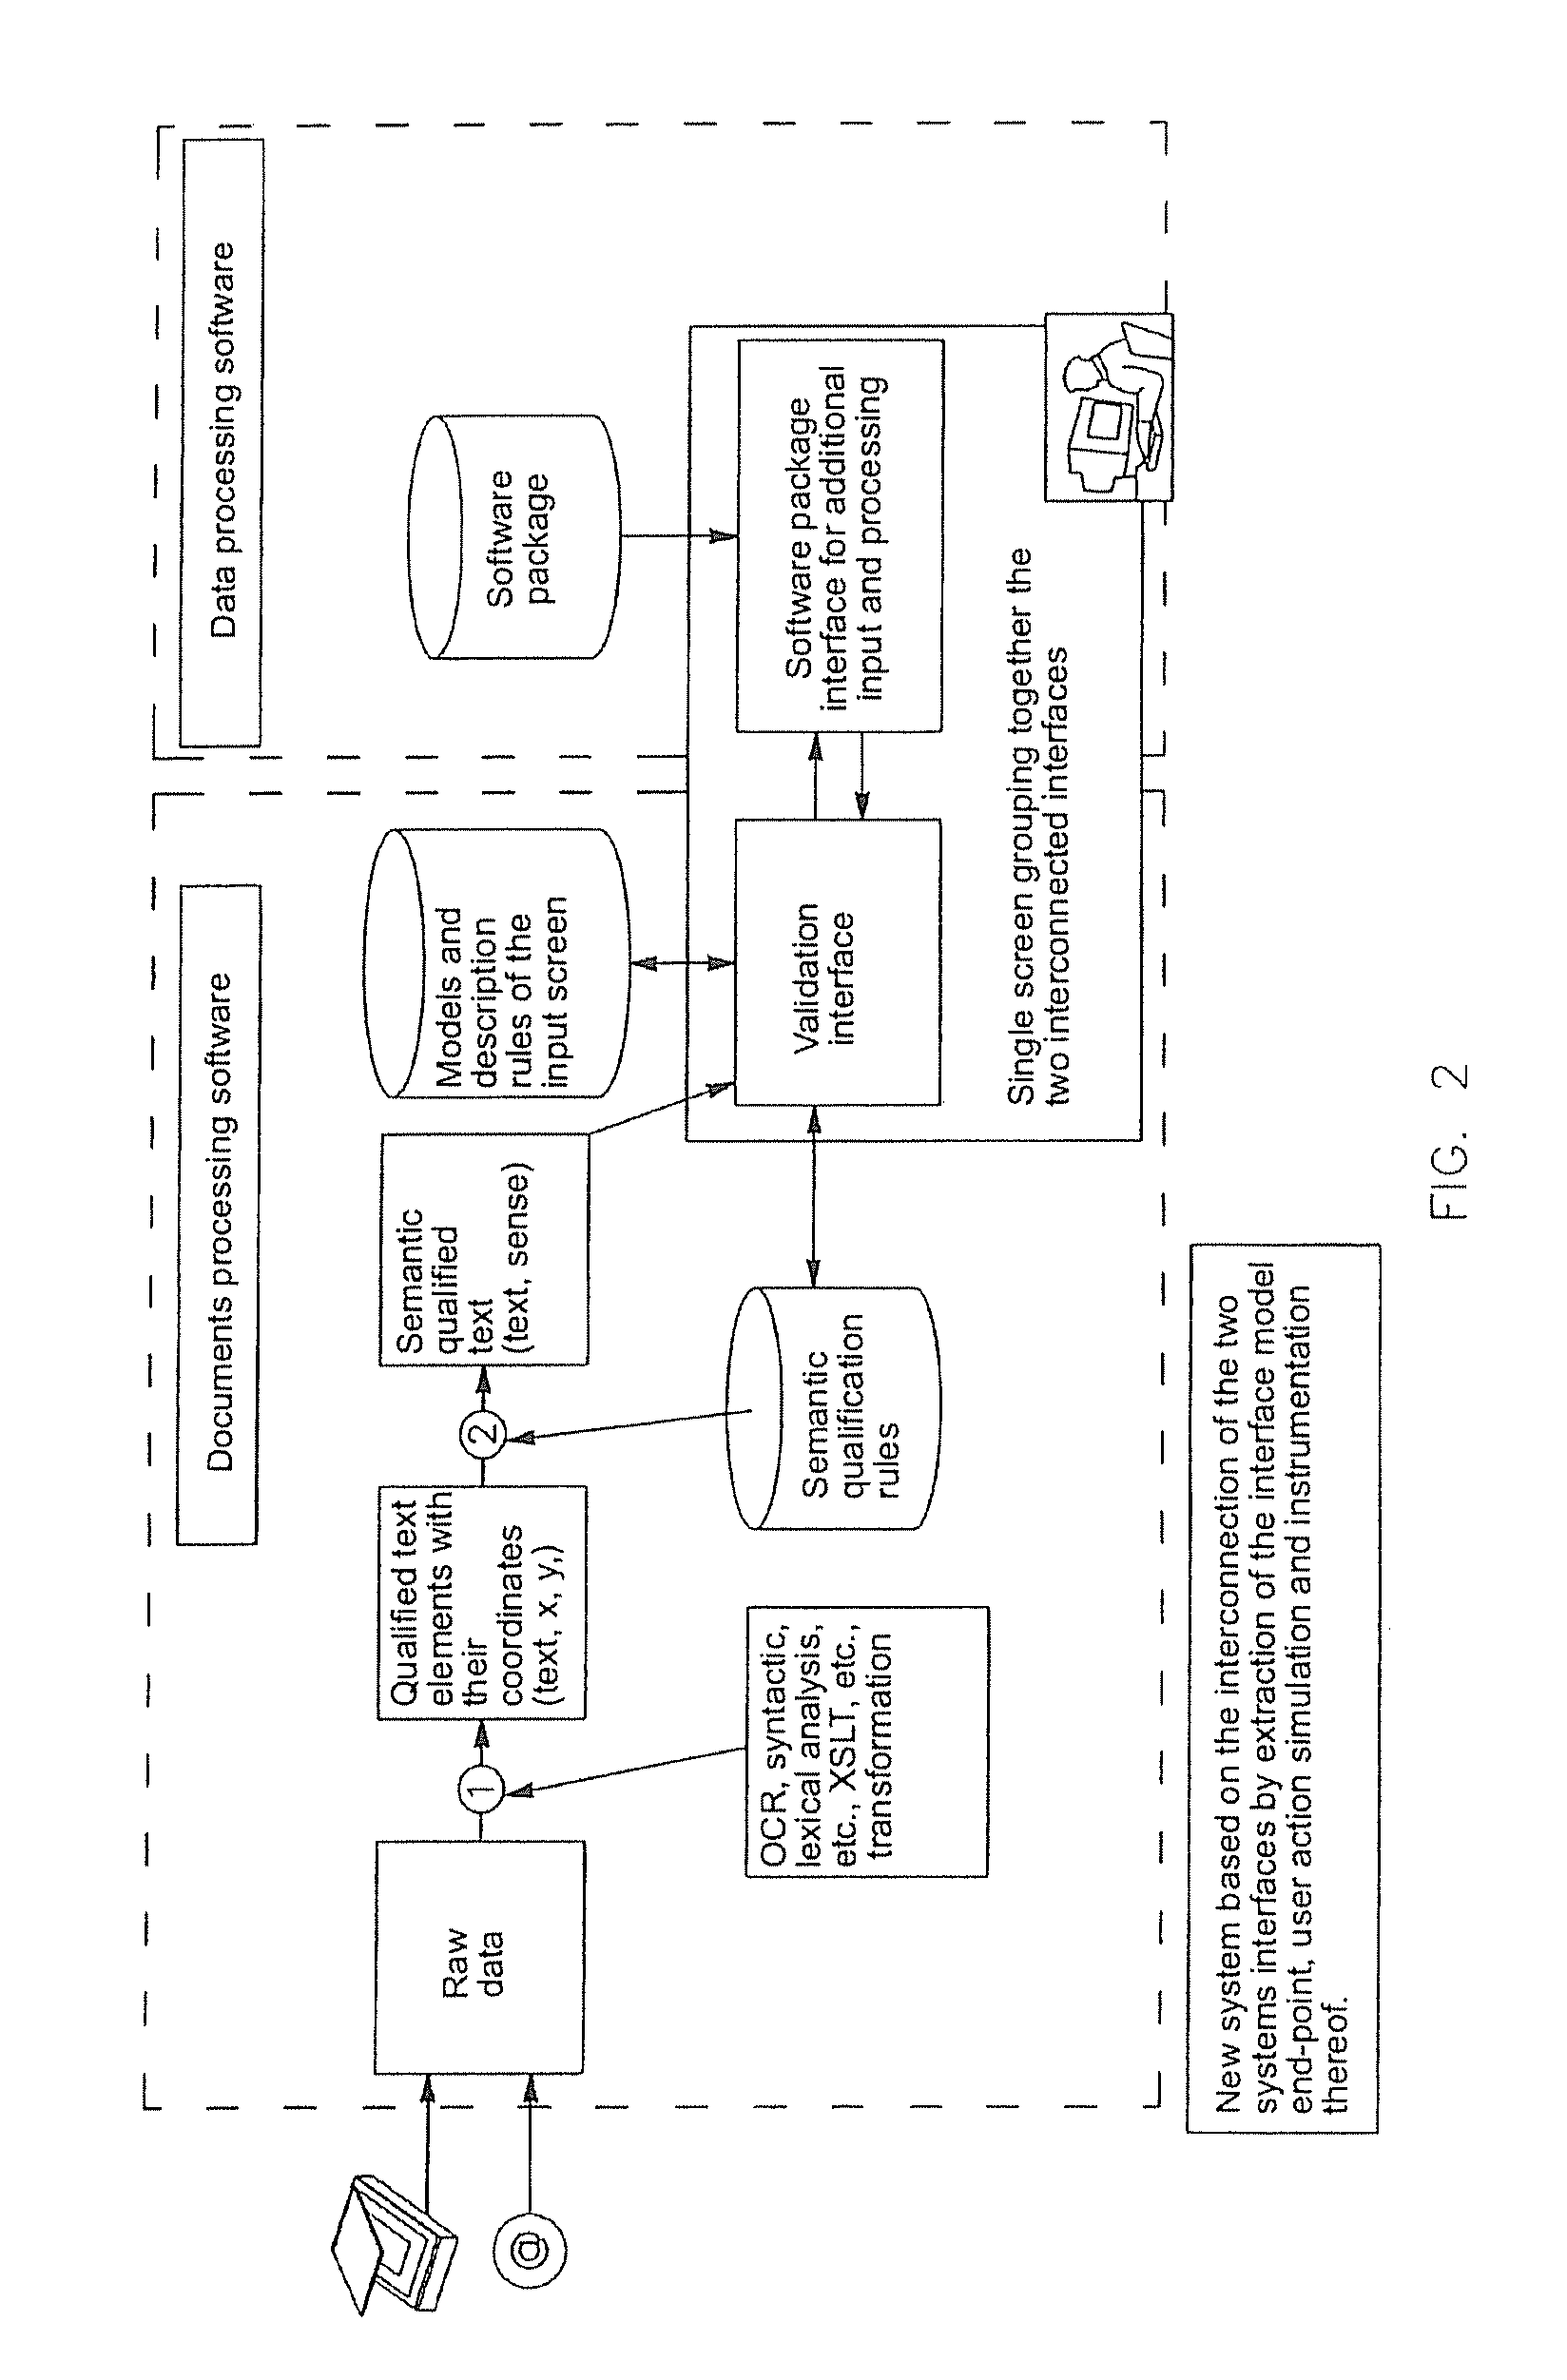 Method and system for aided input especially for computer management tools